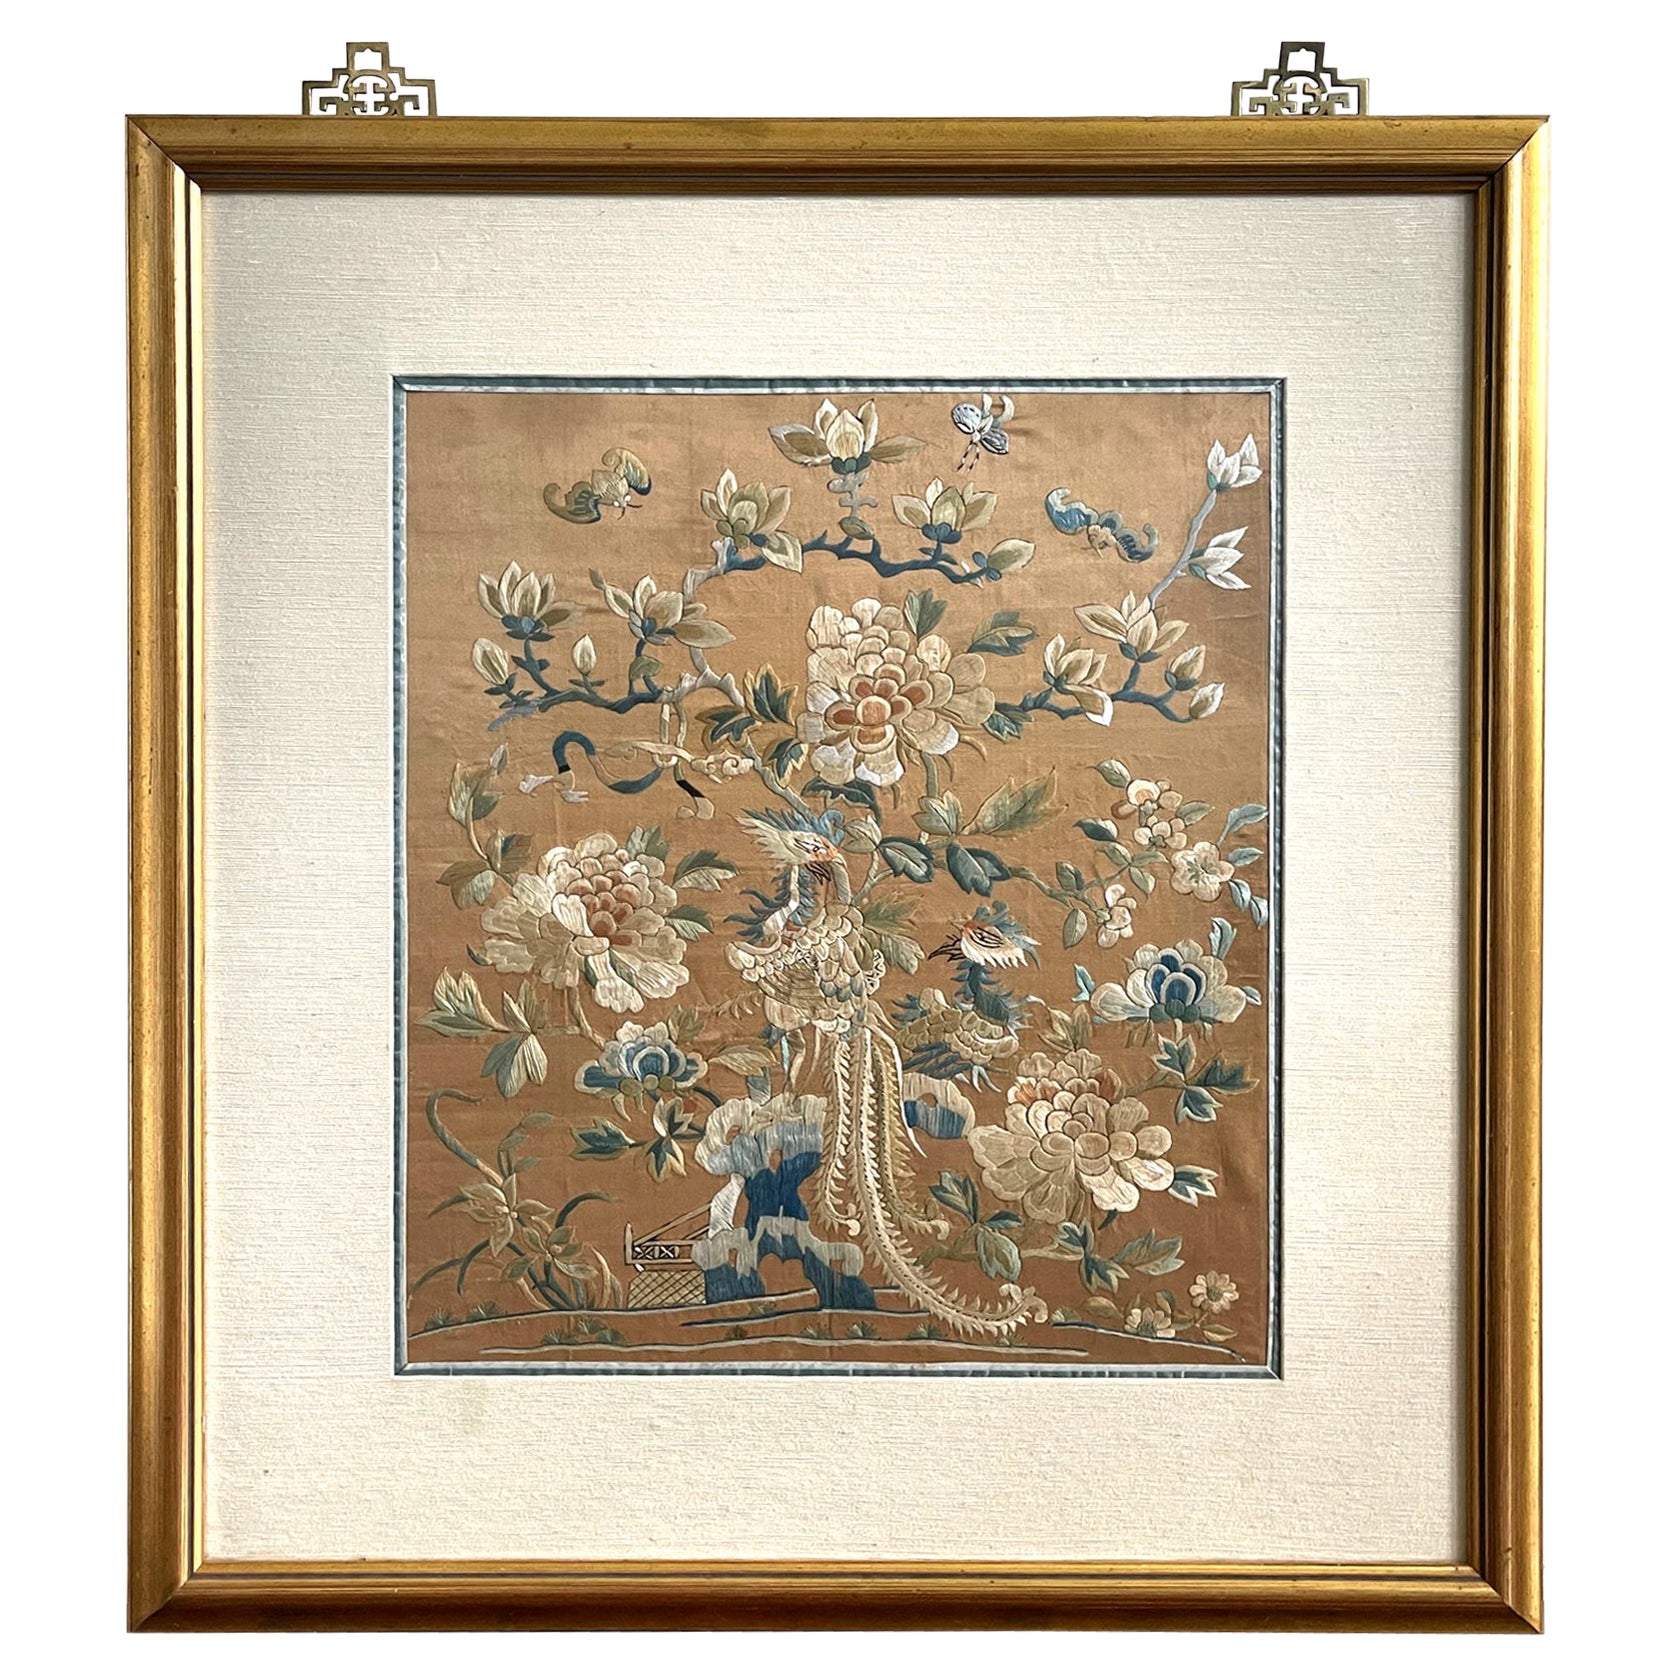 Framed Chinese Antique Silk Embroidery Panel